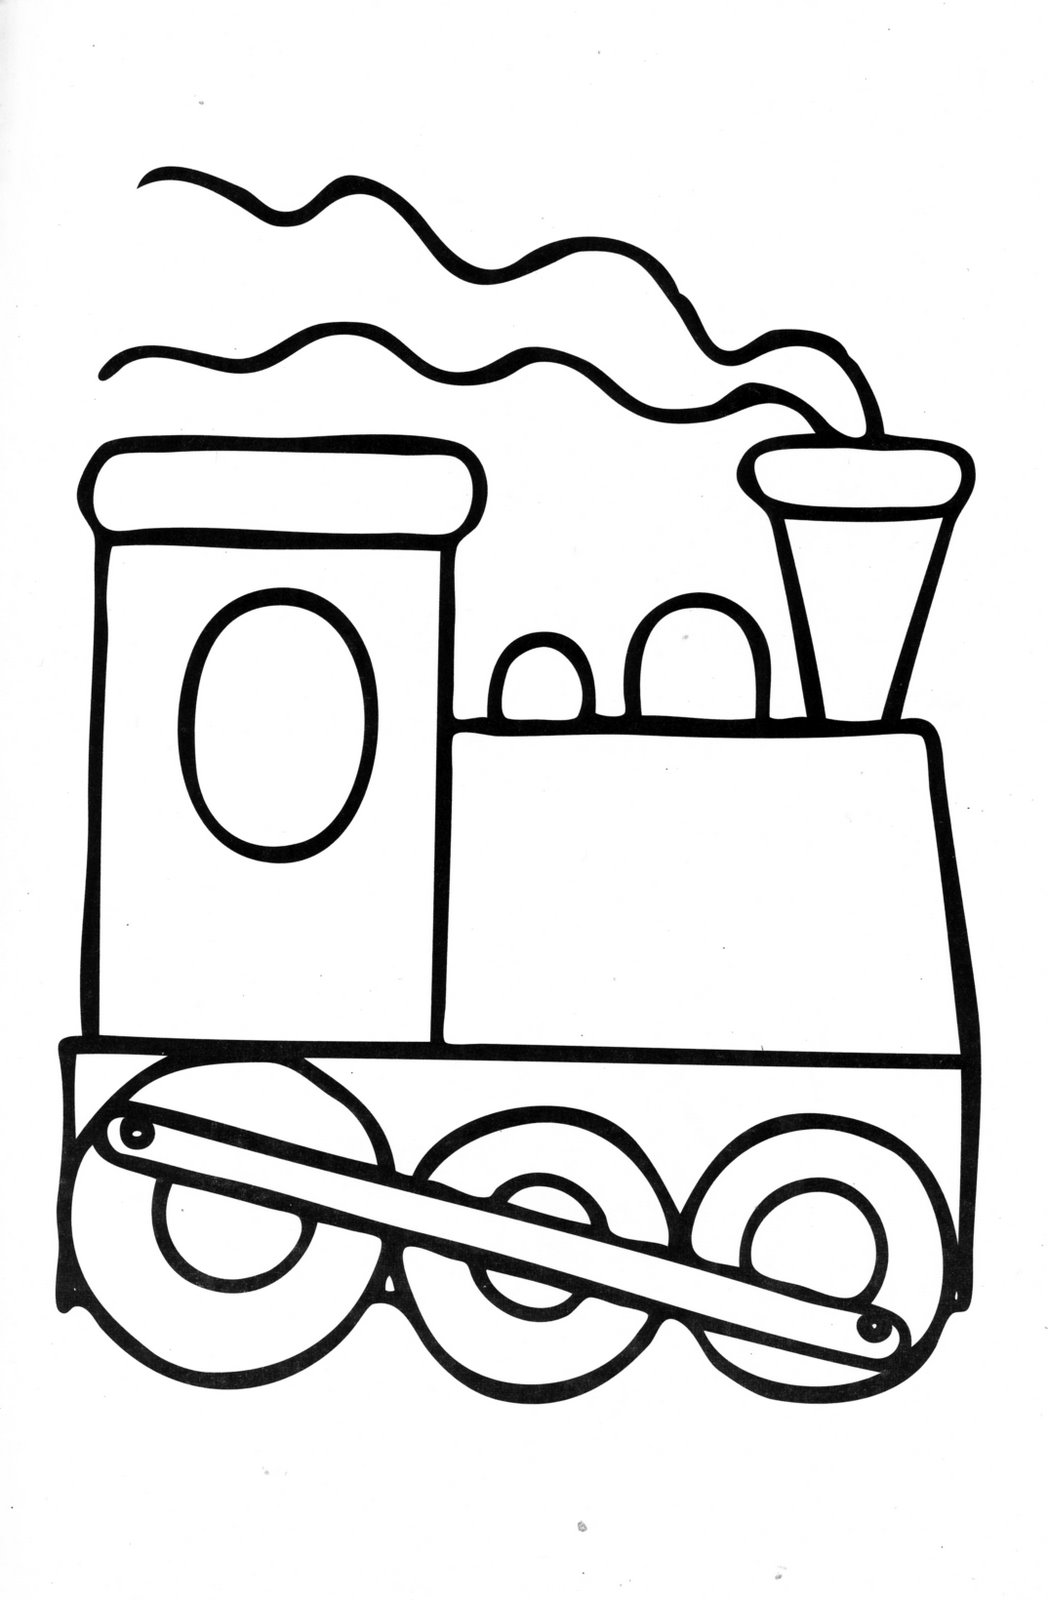 Train Coloring Pages for Kids | Coloring Ville